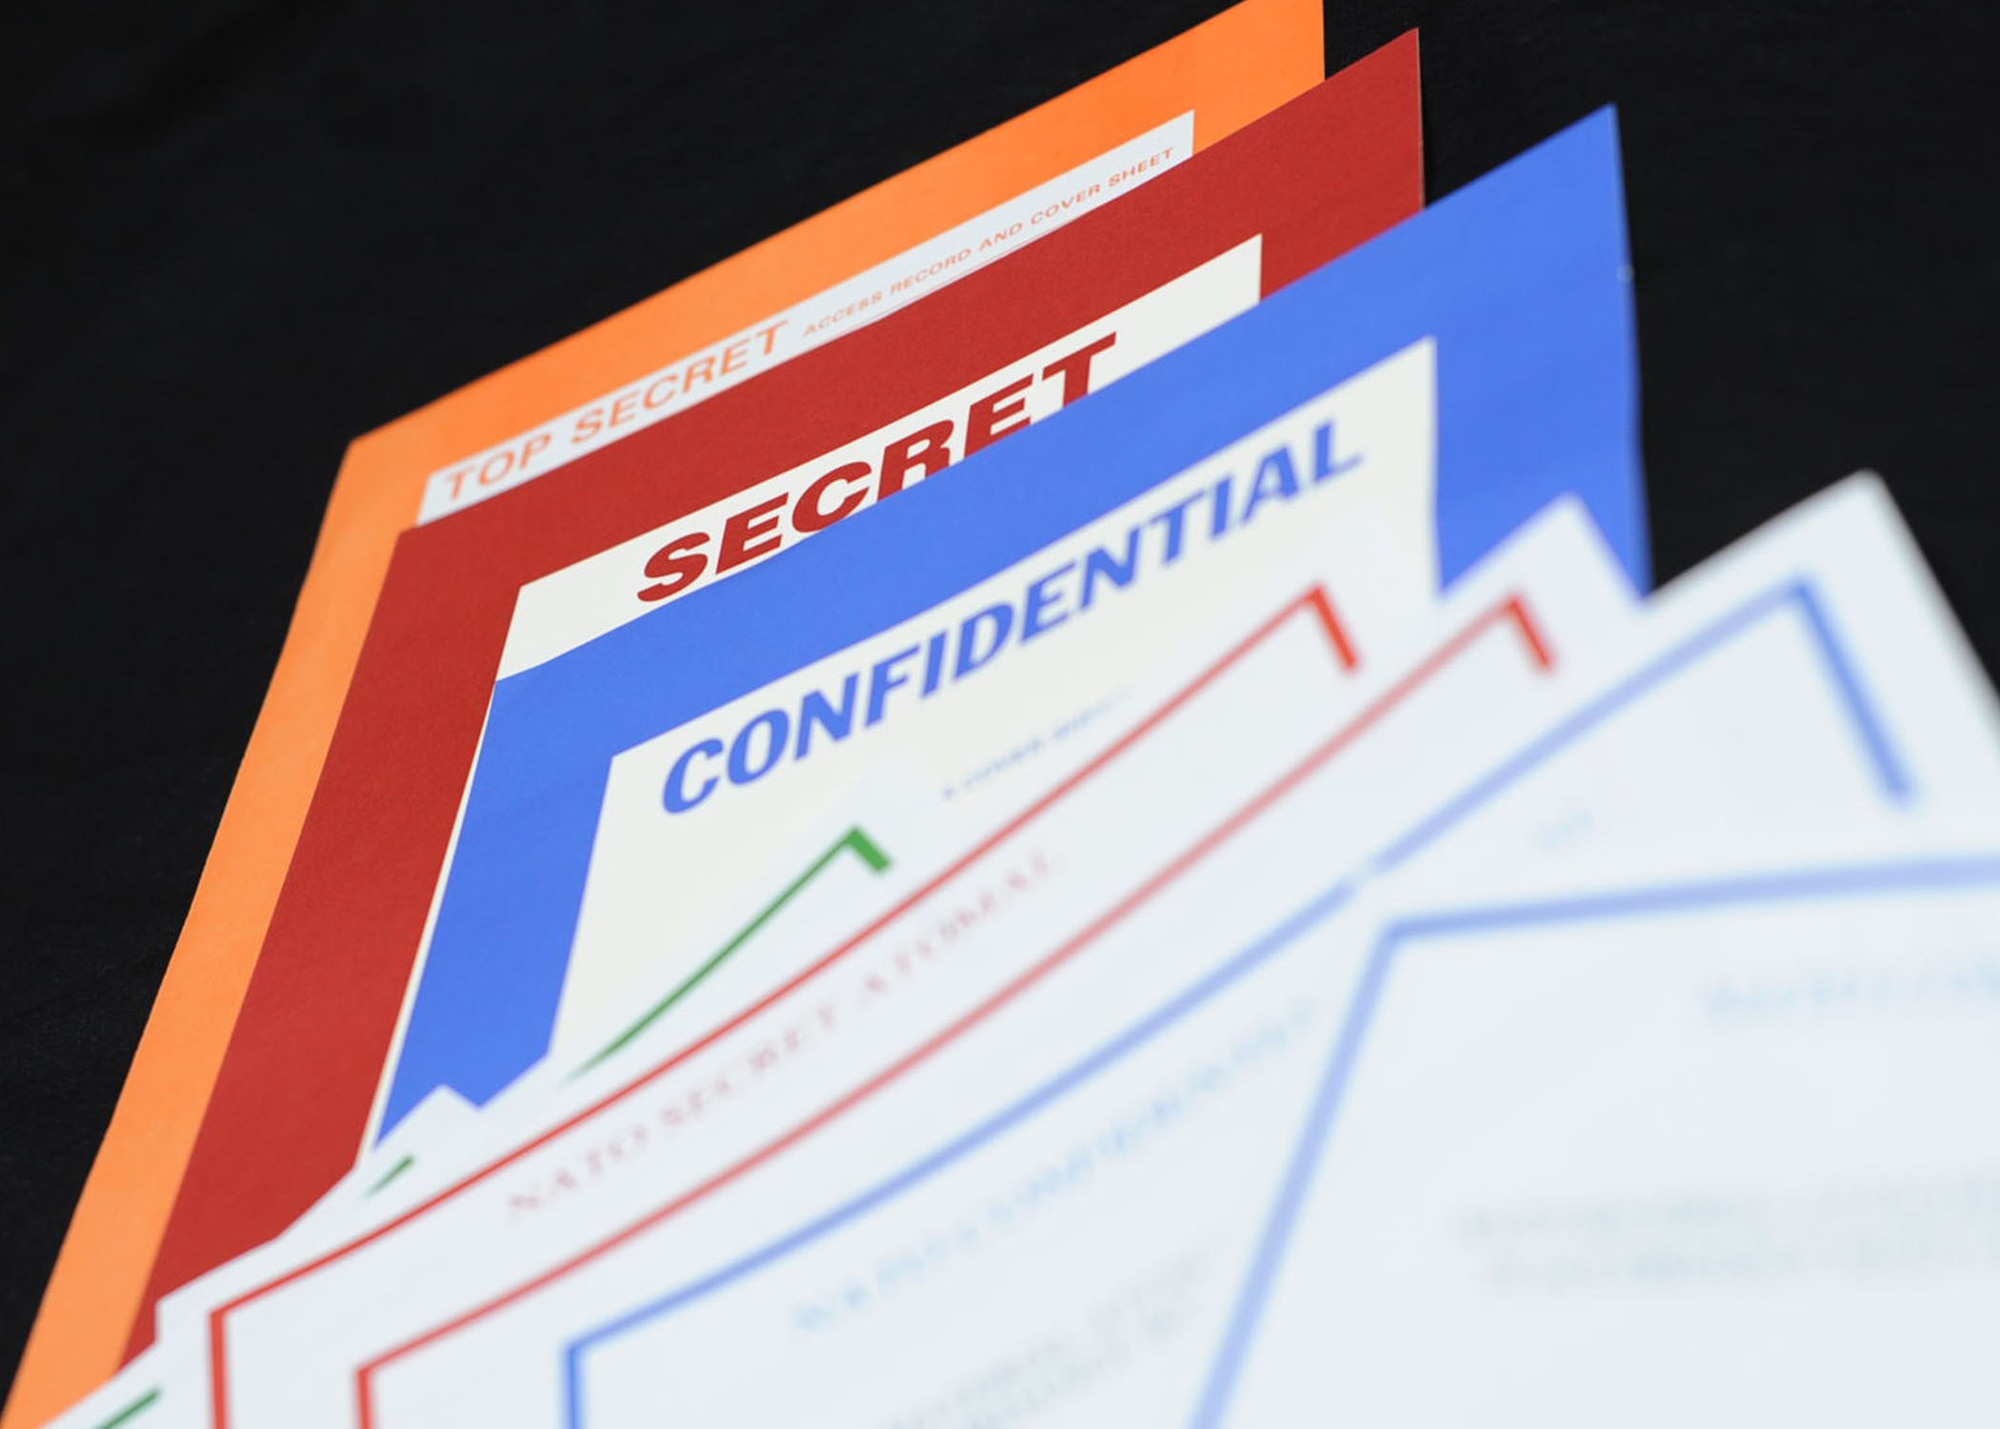 Proper labels of classified information is one of the main aspects of Information Security. (U.S. Air Force photo by Staff Sgt. Eboni Reams/Released)